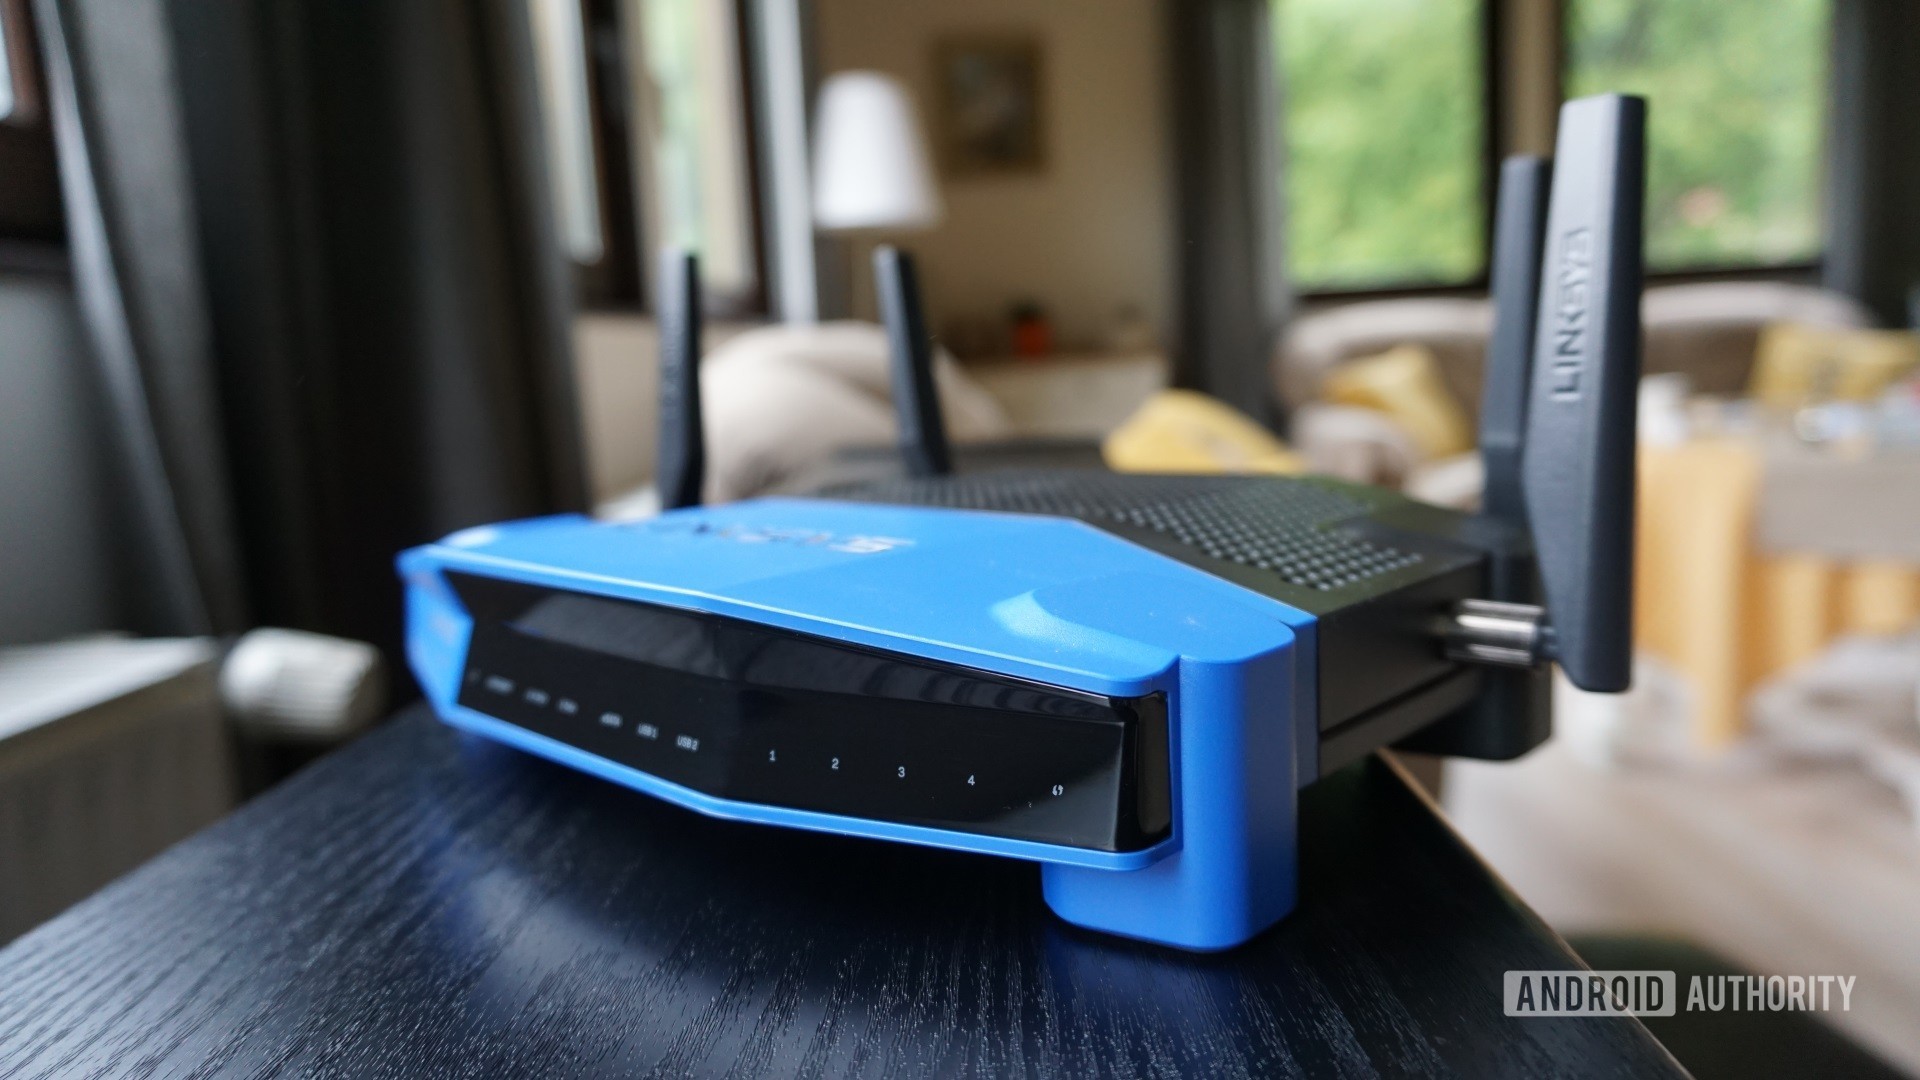 Flashrouters picture of Linksys-3200ACM